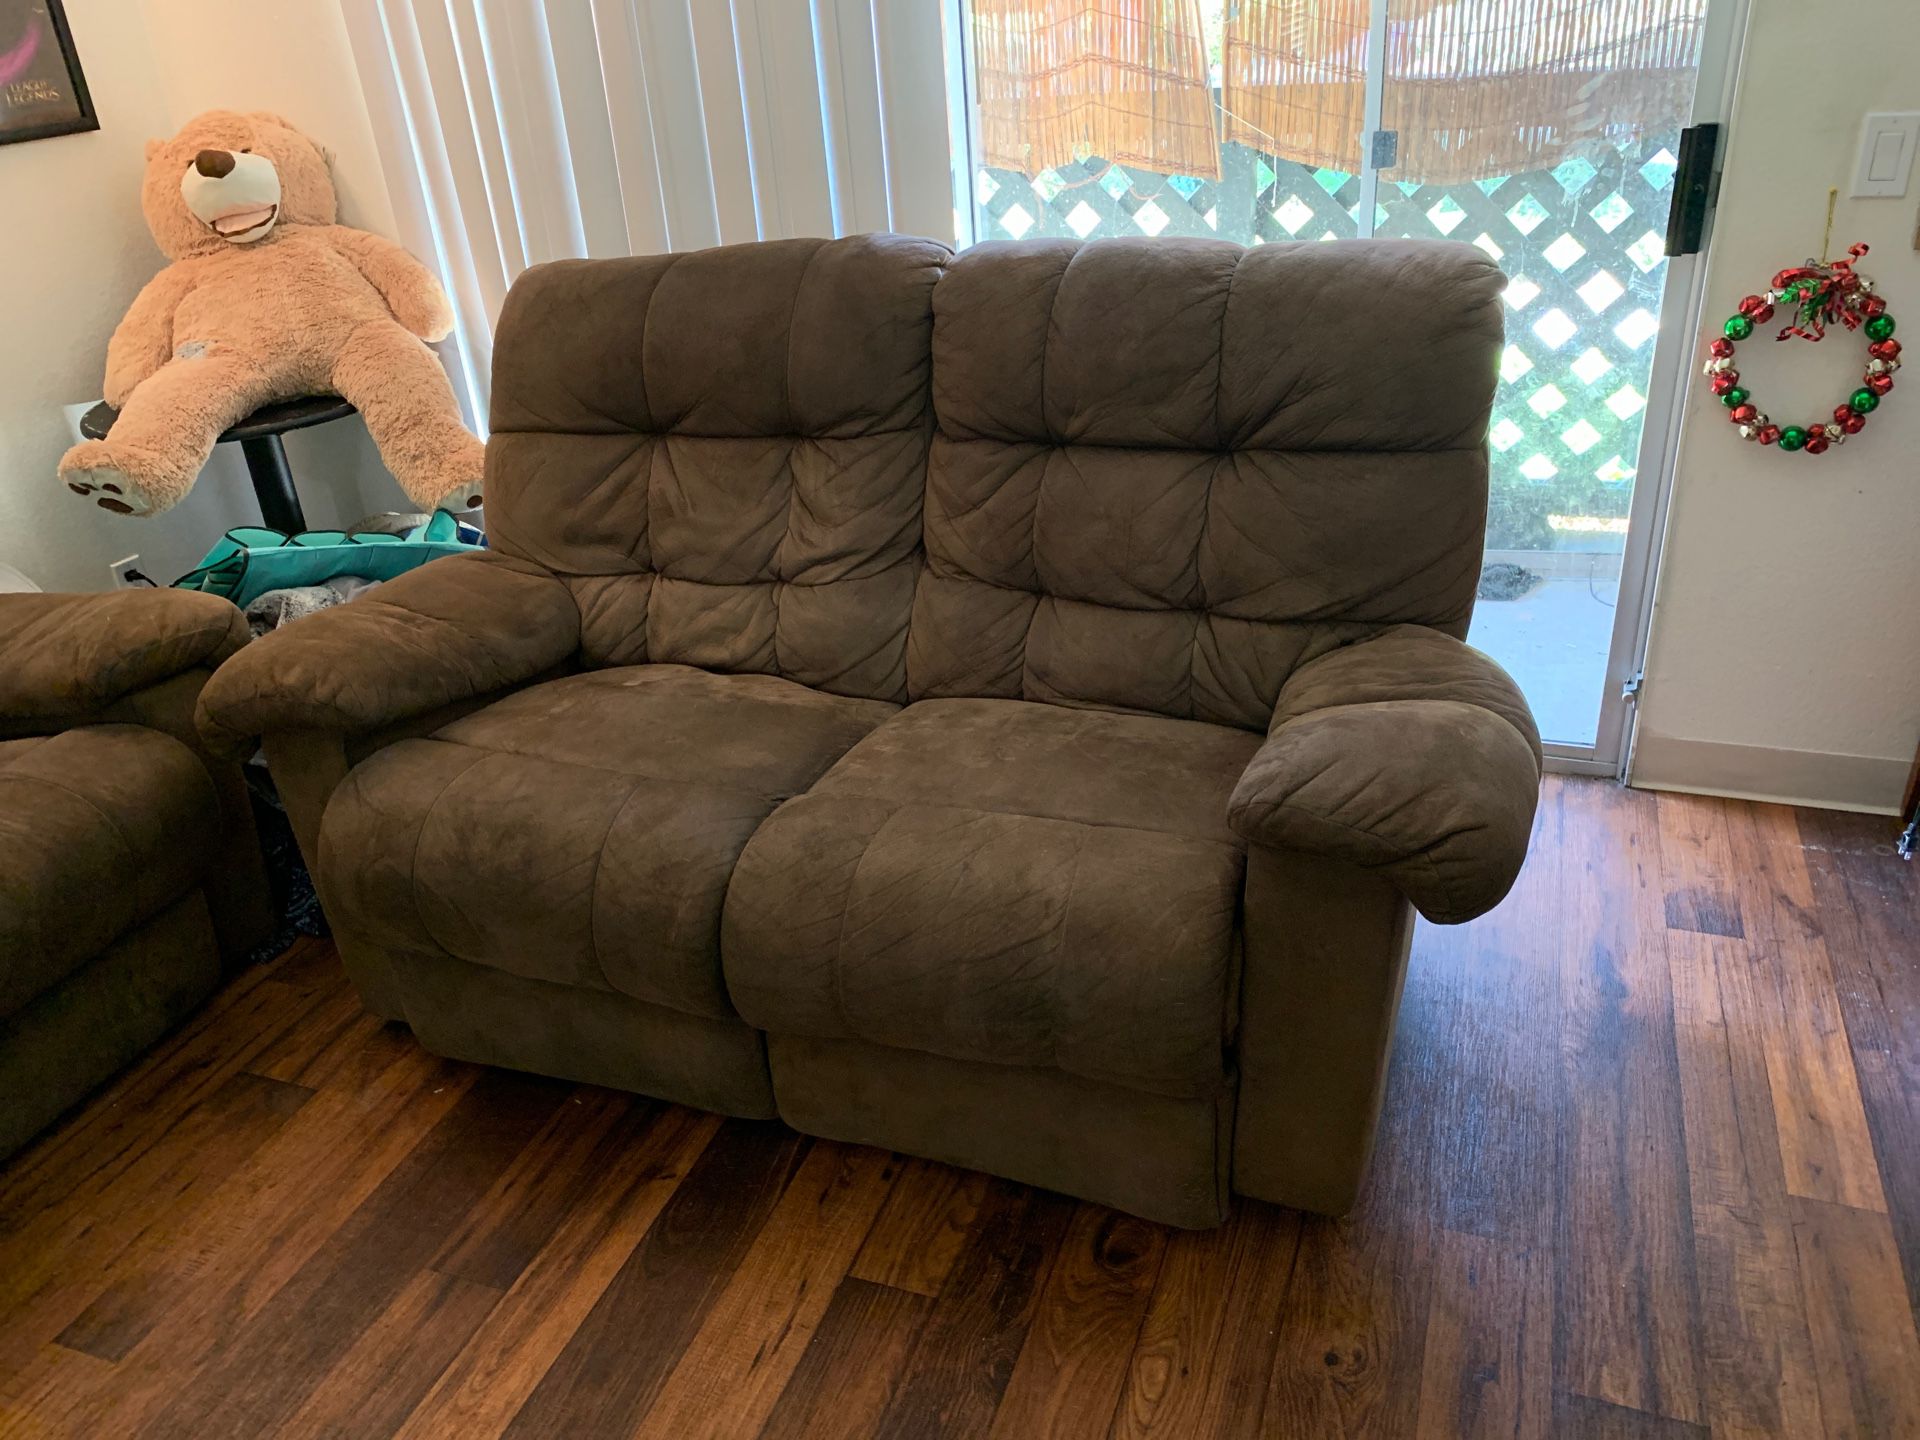 Sofa and loveseat for sale!